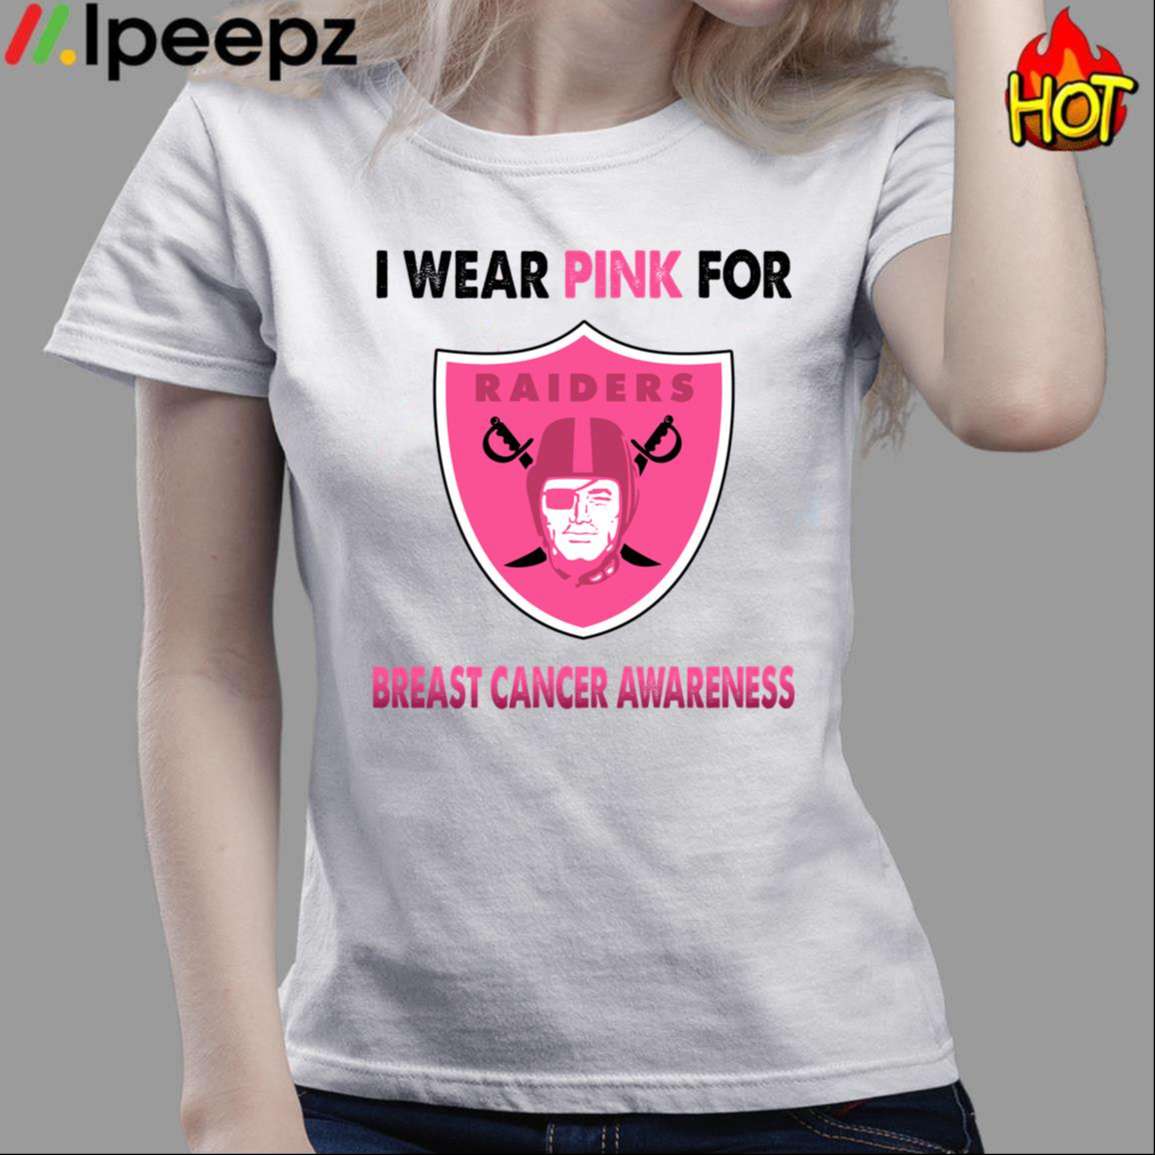 Together We Fight American Football Breast Cancer T-Shirt - Anynee